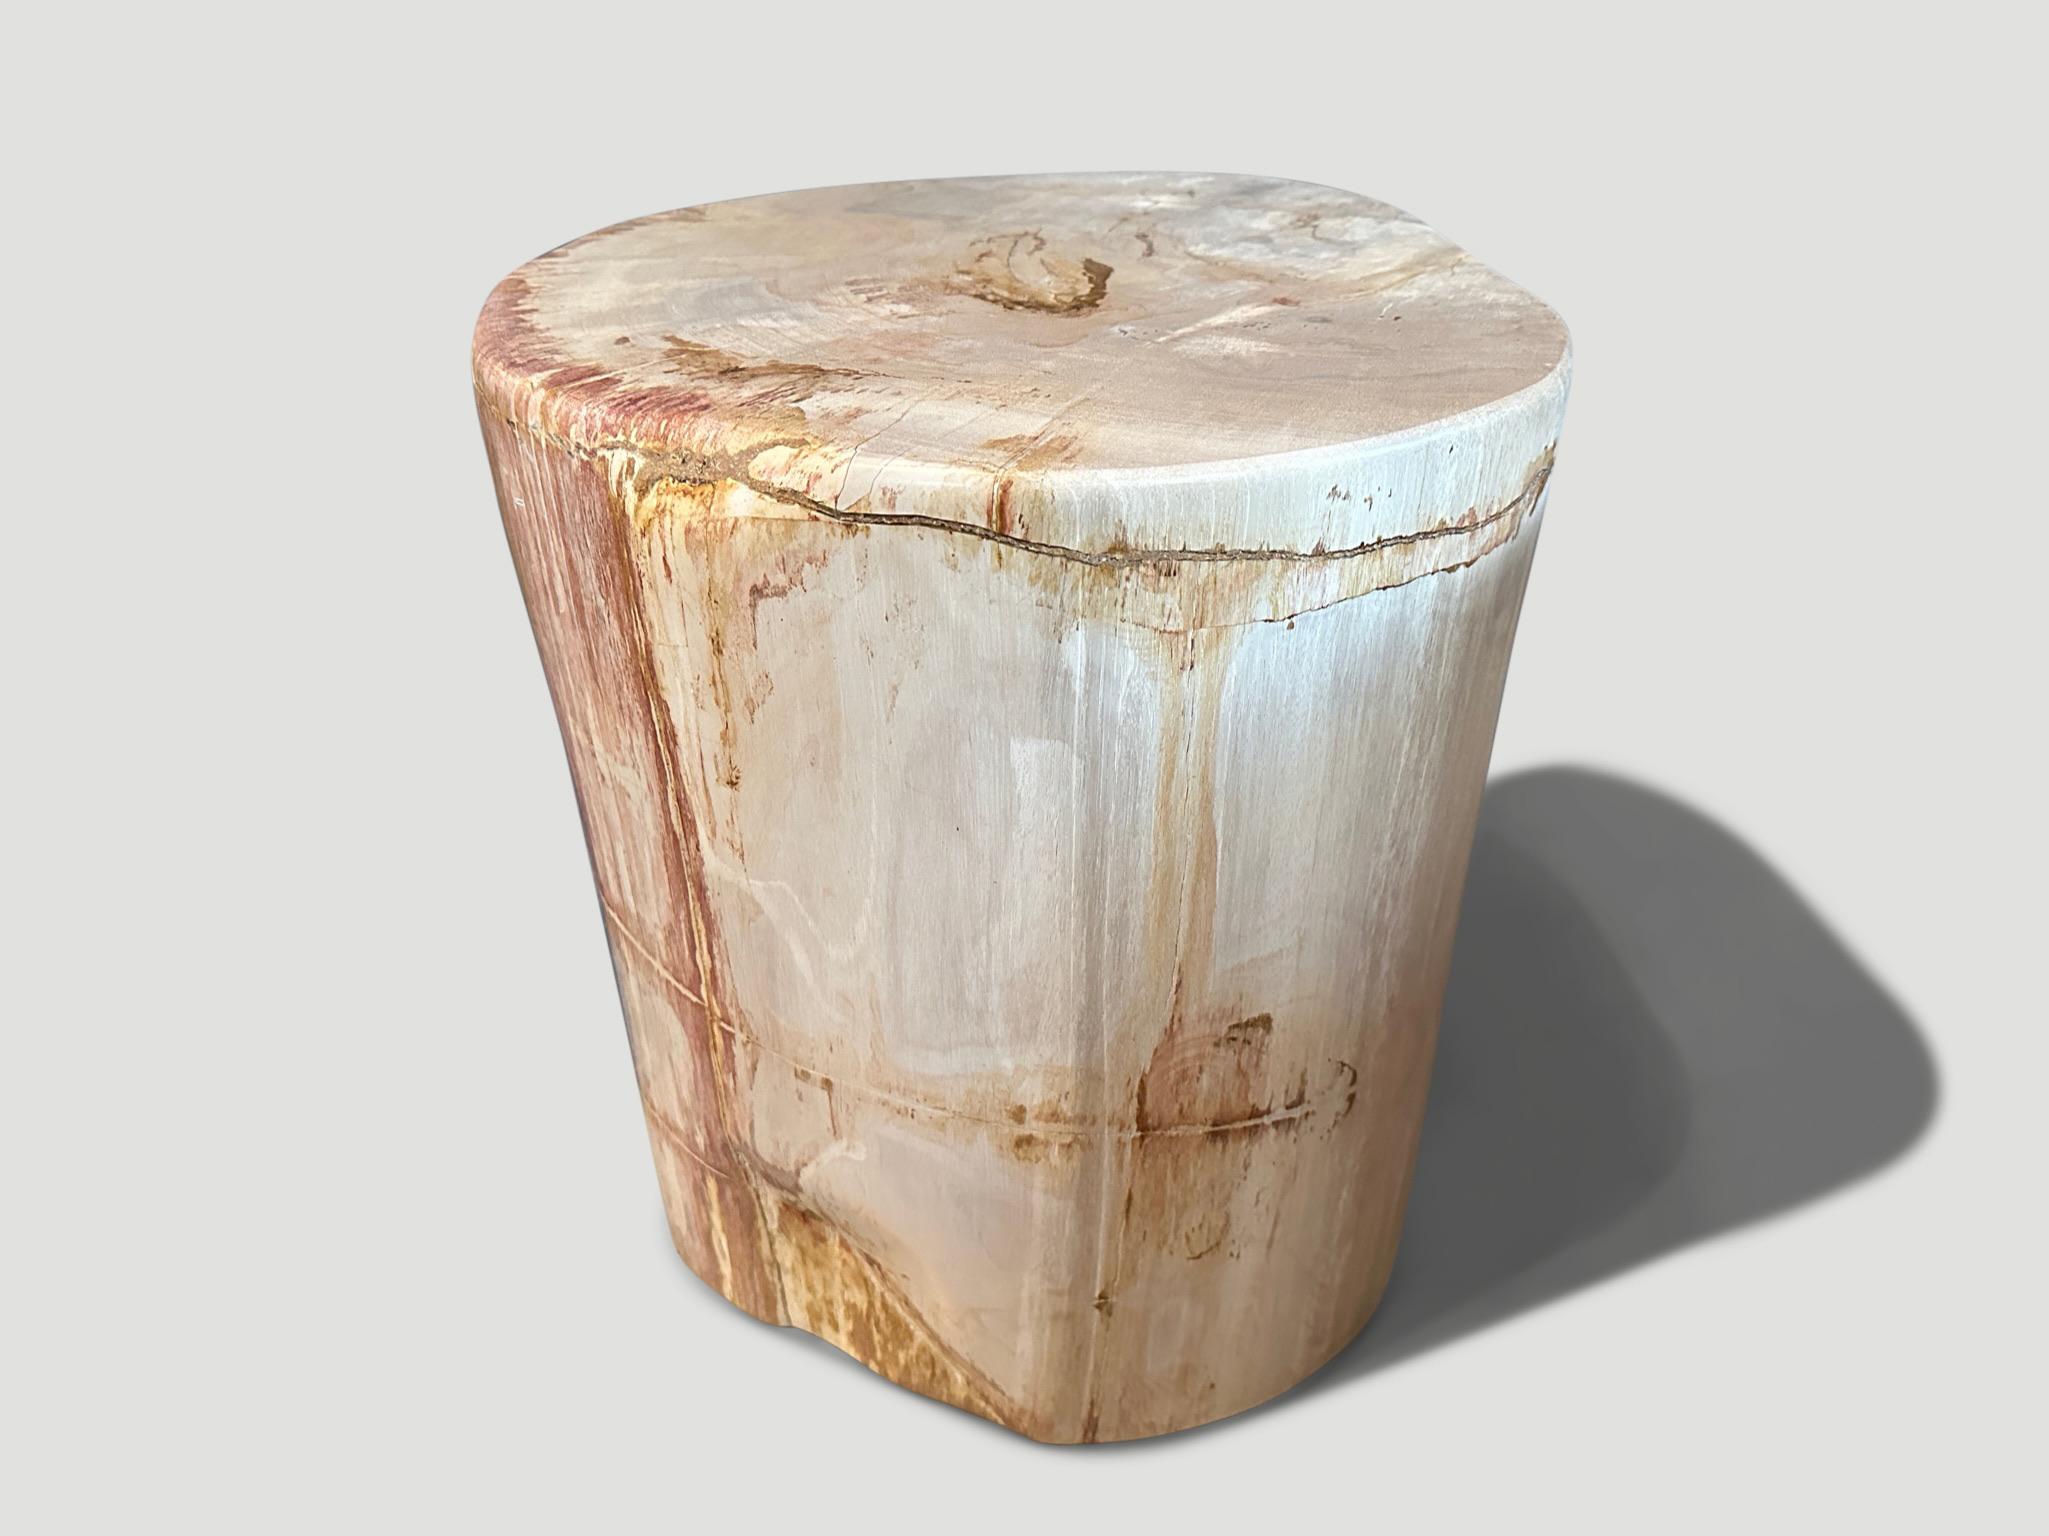 Beautiful coral and beige tones in this high quality petrified wood side table. It’s fascinating how Mother Nature produces these exquisite 40 million year old petrified teak logs with such contrasting colors and natural patterns throughout. Modern